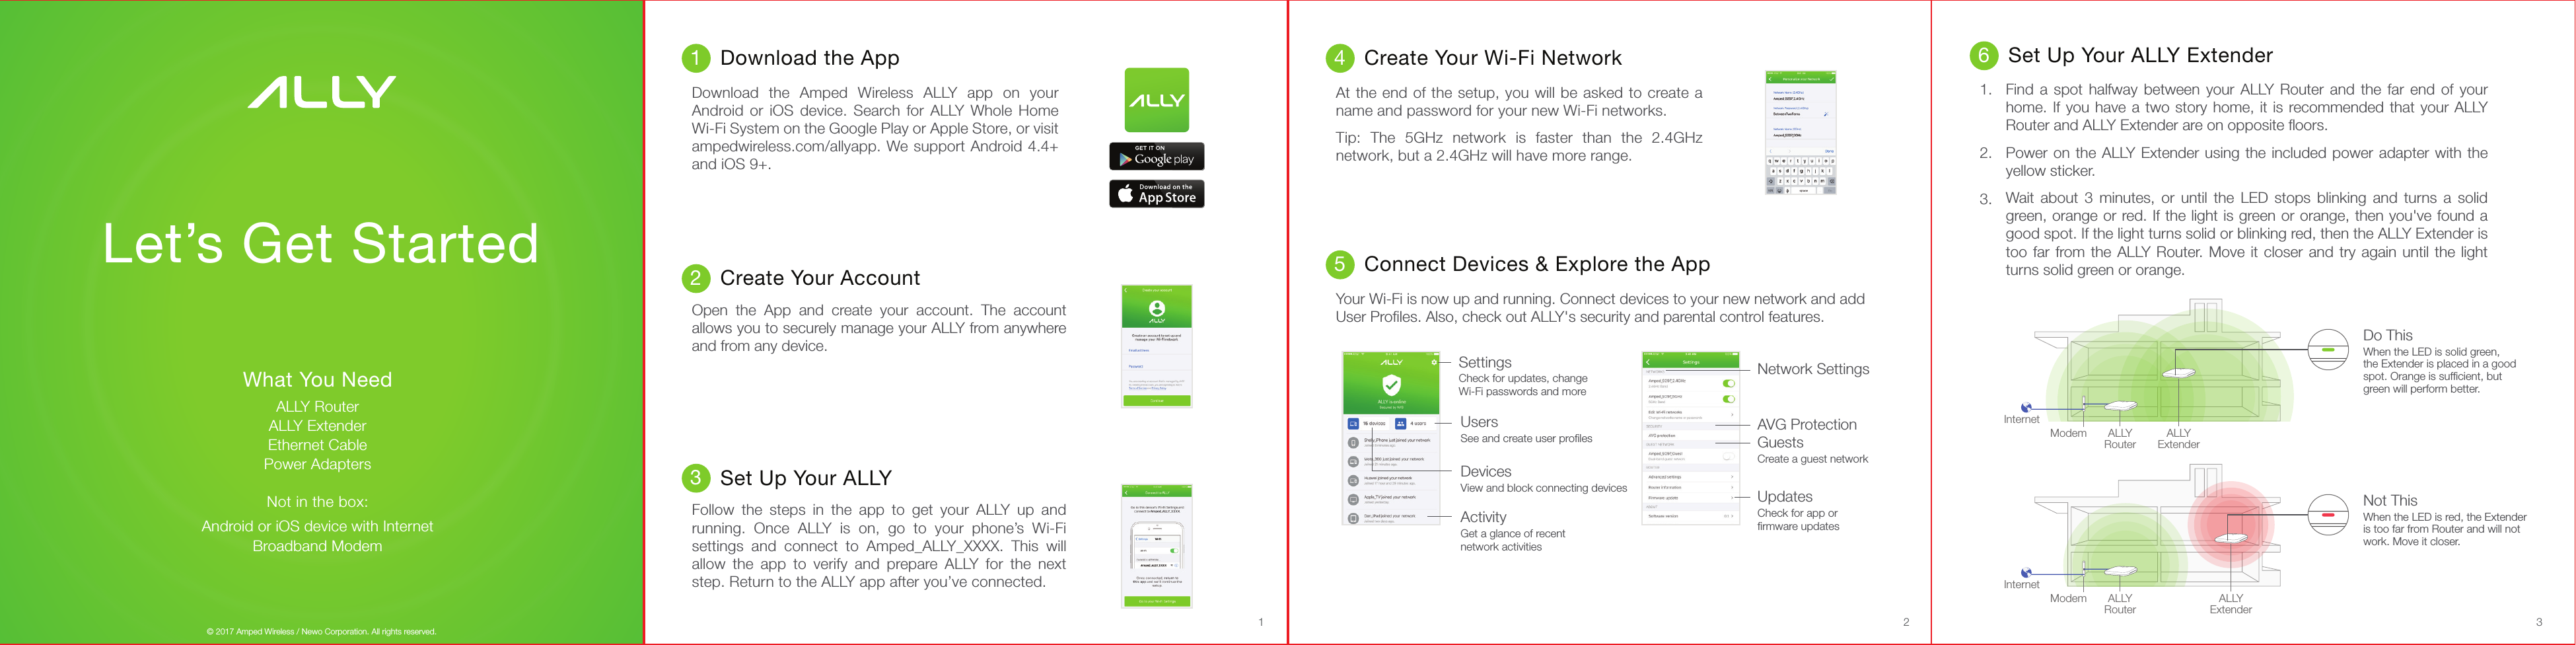 Set Up Your ALLYFollow  the  steps  in  the  app  to  get  your  ALLY  up  and running.  Once  ALLY  is  on,  go  to  your  phone’s  Wi-Fi settings  and  connect  to  Amped_ALLY_XXXX.  This  will allow  the  app  to  verify  and  prepare  ALLY  for  the  next step. Return to the ALLY app after you’ve connected.ModemInternetALLYRouter ALLYExtenderCreate Your Account  Open  the  App  and  create  your  account.  The  account allows you to securely manage your ALLY from anywhere and from any device.SettingsCheck for updates, change Wi-Fi passwords and moreUsersSee and create user proﬁlesDevicesView and block connecting devicesNetwork SettingsAVG ProtectionGuestsCreate a guest networkUpdatesCheck for app orﬁrmware updatesActivityGet a glance of recentnetwork activitiesLet’s Get Started1 2 3What You NeedALLY RouterALLY ExtenderEthernet CablePower AdaptersNot in the box:Android or iOS device with InternetBroadband Modem23Download the AppDownload  the  Amped  Wireless  ALLY  app  on  your Android or  iOS  device. Search for  ALLY Whole  Home Wi-Fi System on the Google Play or Apple Store, or visit ampedwireless.com/allyapp. We support Android 4.4+ and iOS 9+.1Create Your Wi-Fi NetworkAt the end of the setup, you will be asked to create a name and password for your new Wi-Fi networks.Tip:  The  5GHz  network  is  faster  than  the  2.4GHz network, but a 2.4GHz will have more range.4Set Up Your ALLY ExtenderFind  a  spot  halfway  between  your  ALLY Router  and the  far end  of your home. If you have a two story home, it is recommended that your ALLY Router and ALLY Extender are on opposite ﬂoors.Power on the ALLY Extender using the included  power adapter with the yellow sticker.Wait  about  3  minutes,  or  until  the  LED  stops  blinking  and  turns  a  solid green, orange or red. If the light is green or orange, then you&apos;ve found a good spot. If the light turns solid or blinking red, then the ALLY Extender is too far from the ALLY Router. Move  it  closer  and try  again  until  the light turns solid green or orange.1. 2.3.6Connect Devices &amp; Explore the AppYour Wi-Fi is now up and running. Connect devices to your new network and add User Proﬁles. Also, check out ALLY&apos;s security and parental control features.5ModemInternetALLYRouter ALLYExtenderDo ThisWhen the LED is solid green, the Extender is placed in a good spot. Orange is sufﬁcient, but green will perform better.Not ThisWhen the LED is red, the Extender is too far from Router and will notwork. Move it closer.© 2017 Amped Wireless / Newo Corporation. All rights reserved.